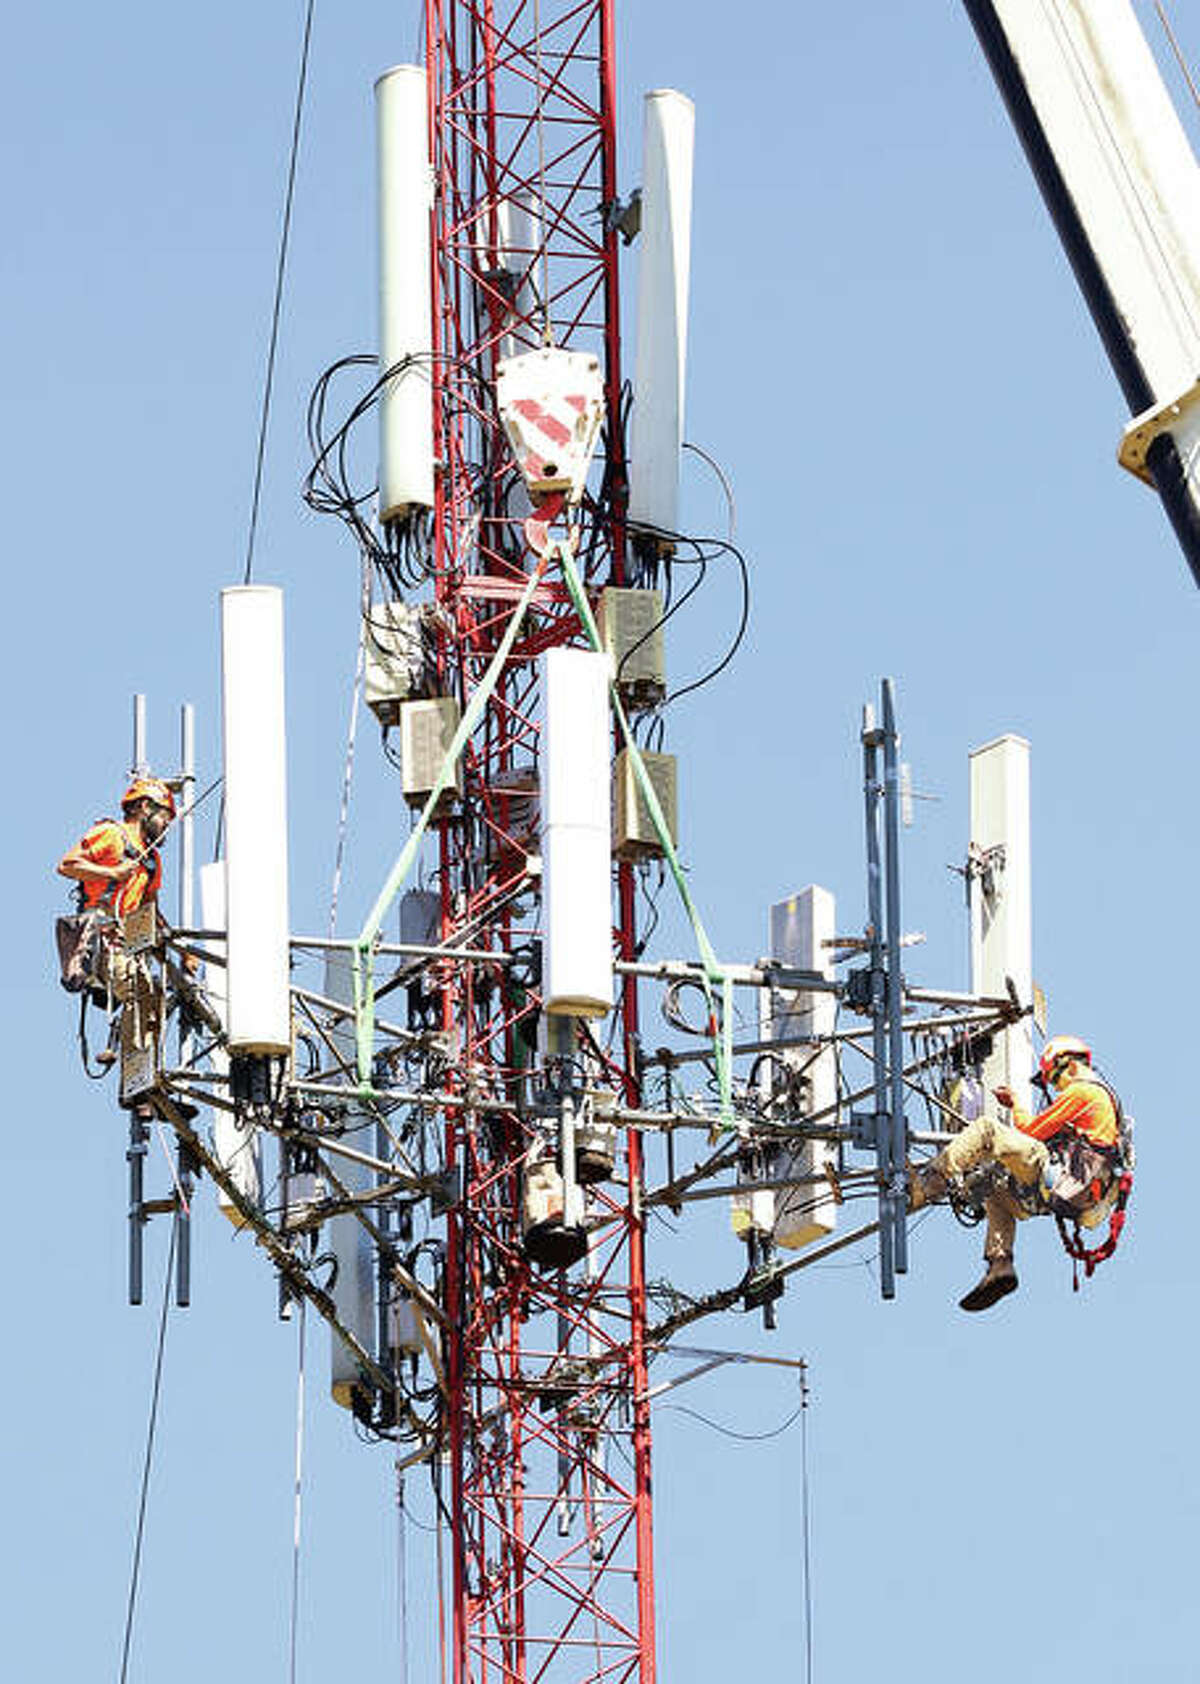 It wasn’t a job for anybody afraid of heights but two telecommunications workers were hanging from the Godfrey cellular tower, about 100 feet in the air, near the end of Bryden Lane Thursday to replace all three sides of the cellular platform and the antennas attached to them.